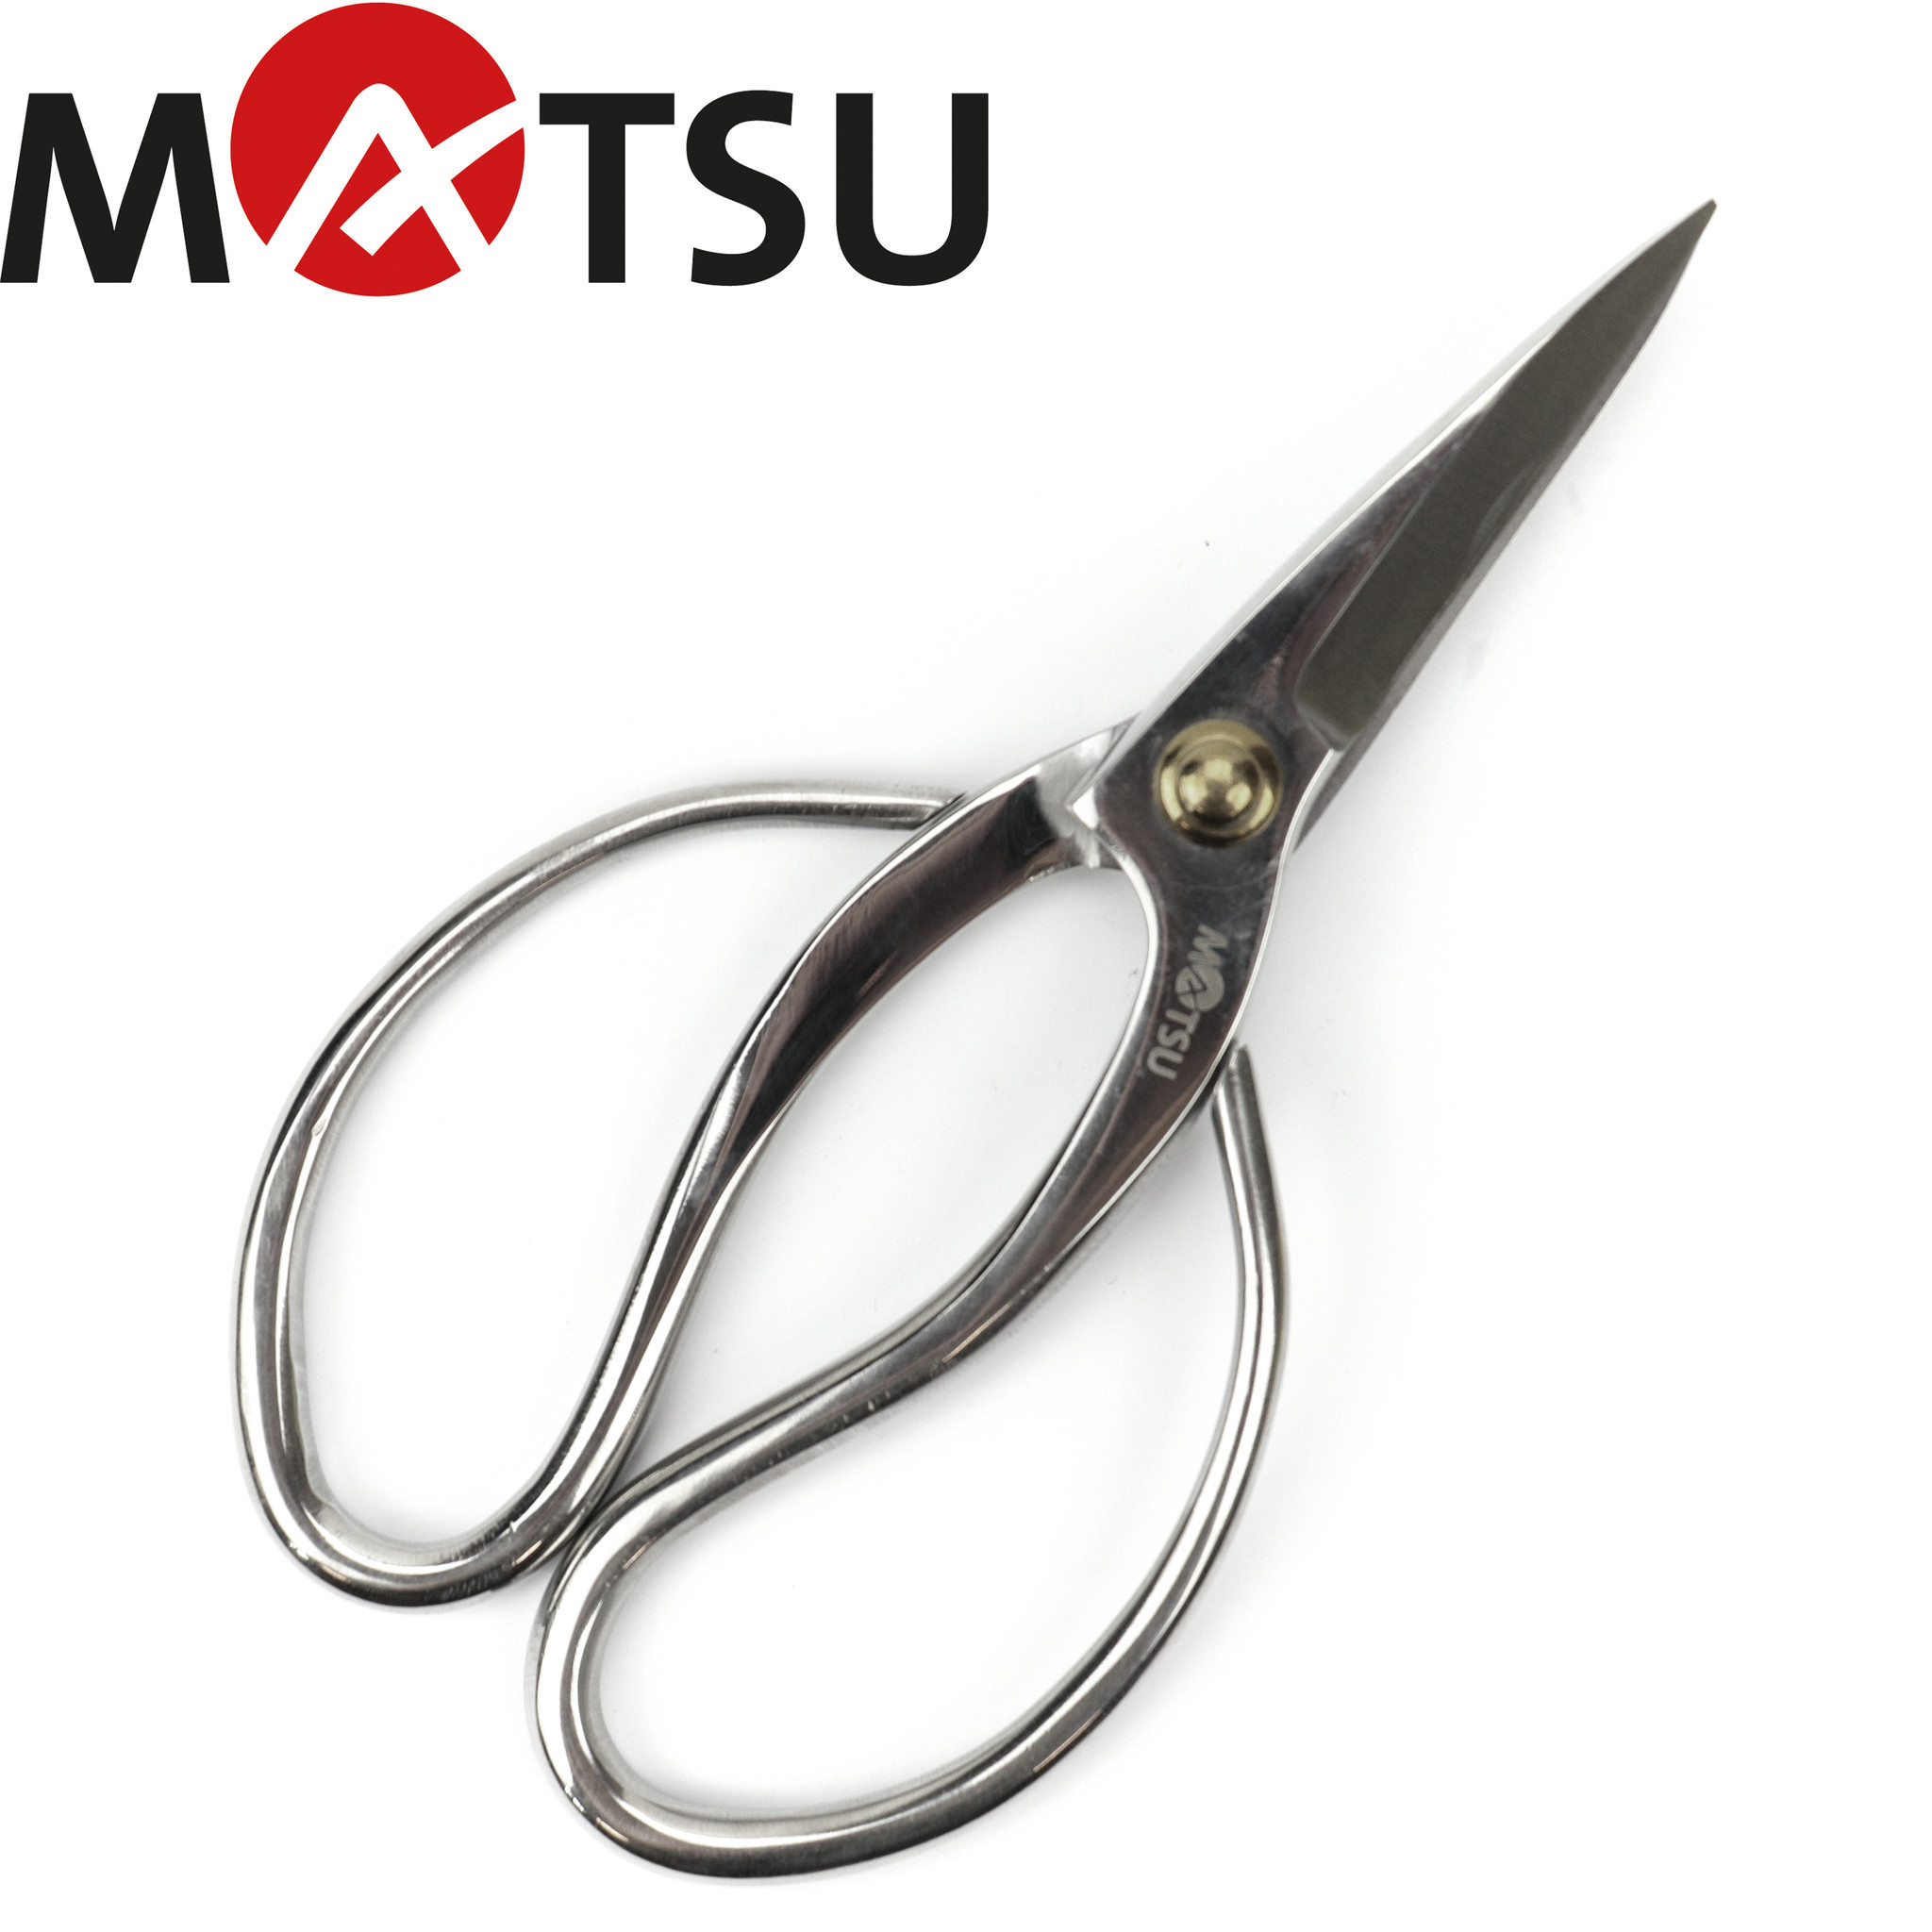 No.5019 Stainless steel trimming scissors [96g/180mm] - Bonsai Network Japan